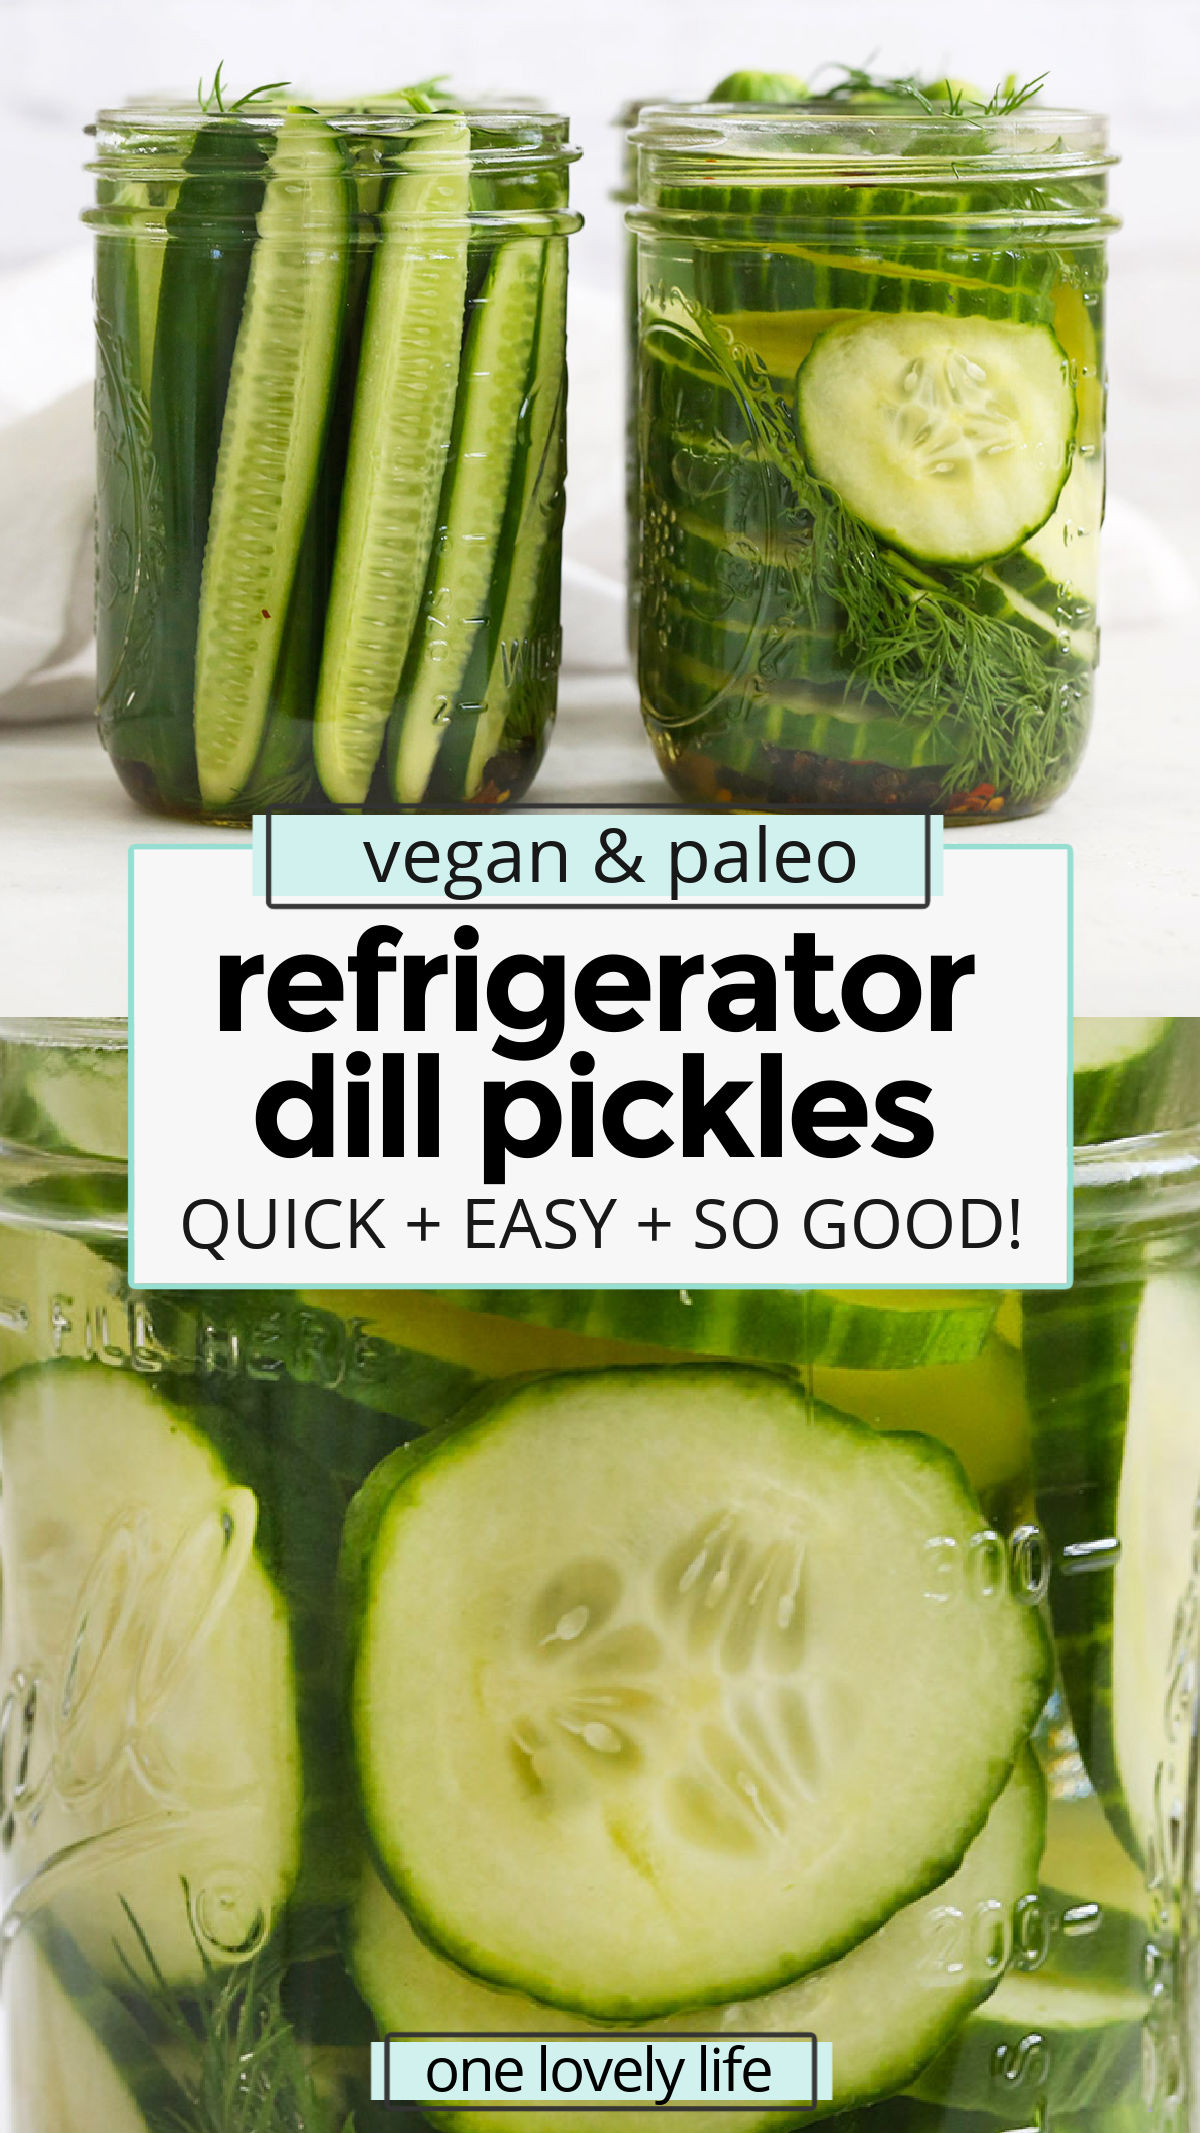 Refrigerator Dill Pickles - It's easy to make refrigerator dill pickles at home. No fancy equipment or special skills required! (Paleo, Whole30, Gluten-Free) // dill pickles recipe // refrigerator pickles recipe // easy refrigerator pickles // dill pickles no canning // fresh dill pickles // homemade dill pickles // the best refrigerator dill pickles